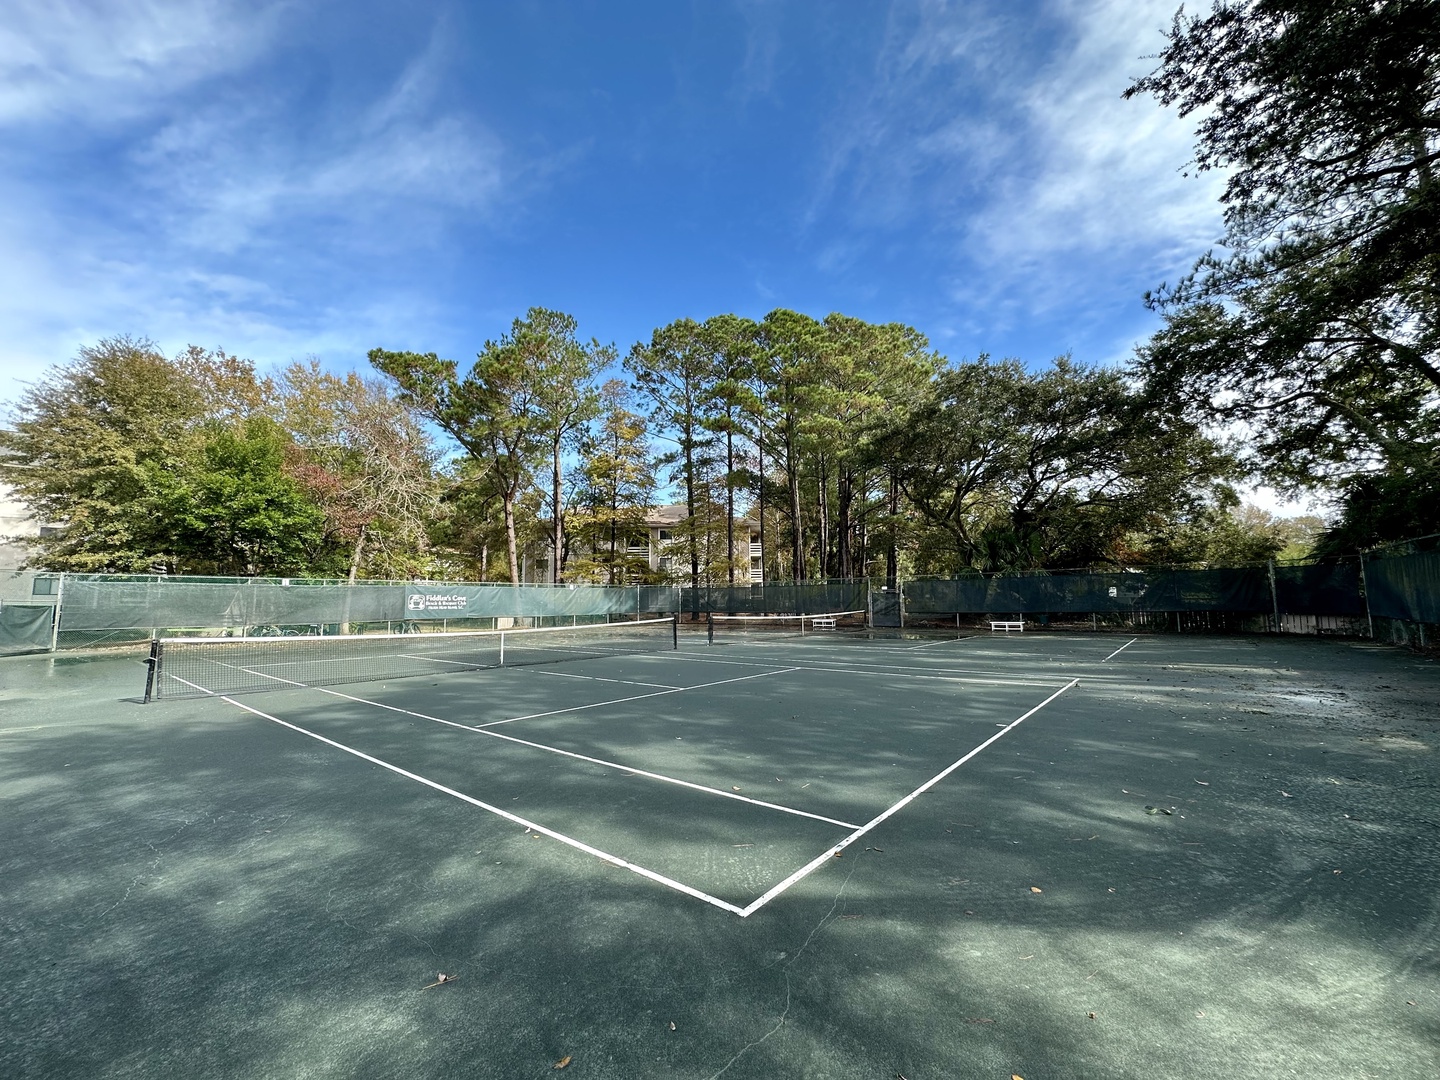 Fiddler's Cove community tennis / pickleball courts are available for your enjoyment